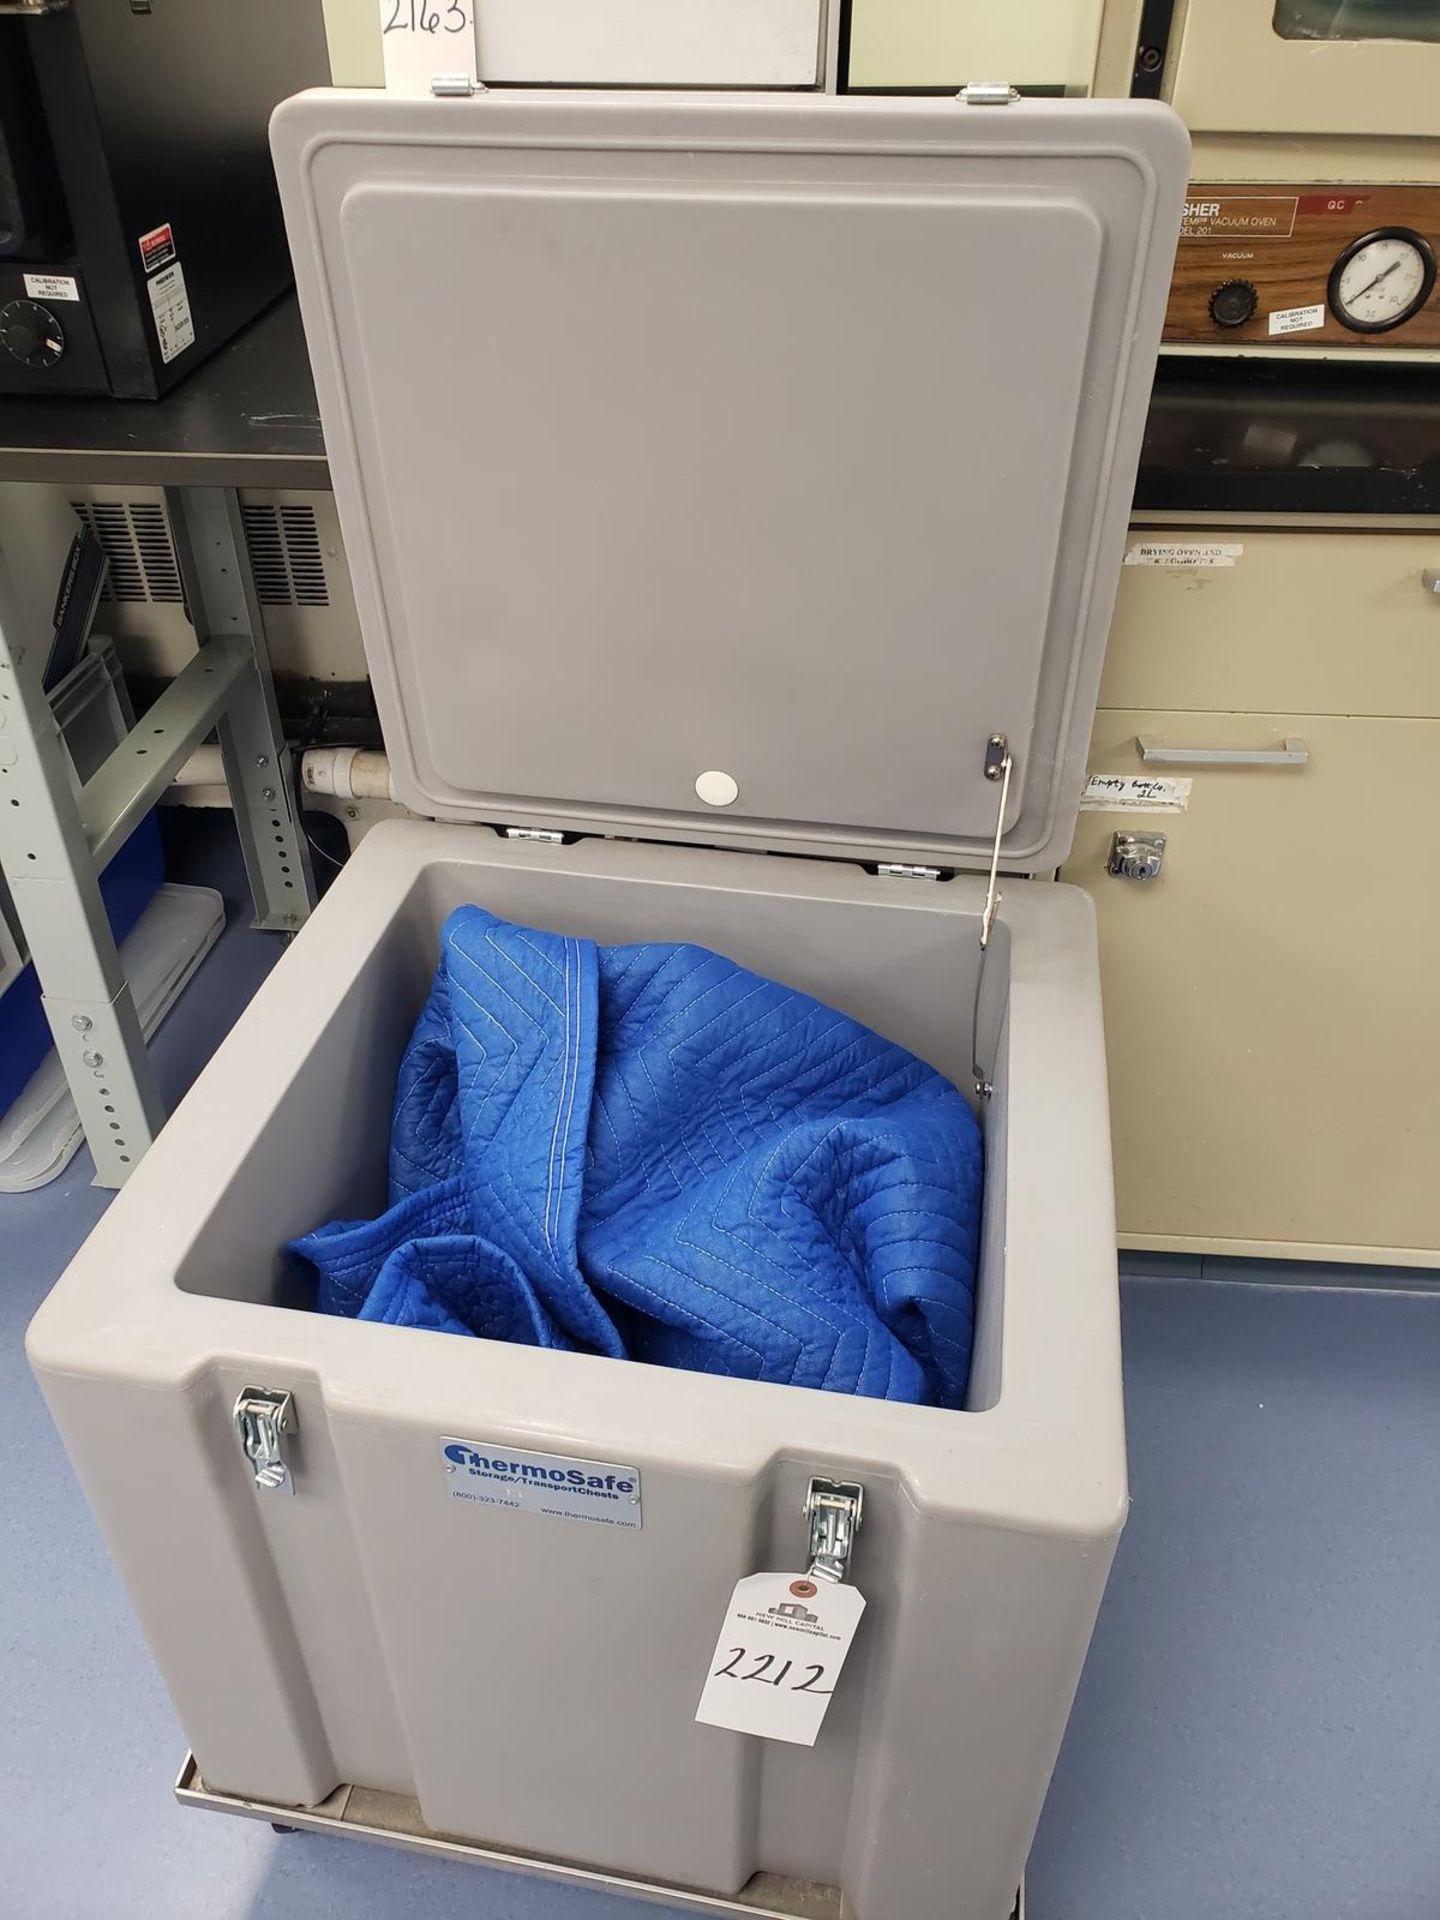 Thermo Safe Dry Ice Storage/Transport Chest - Image 3 of 3